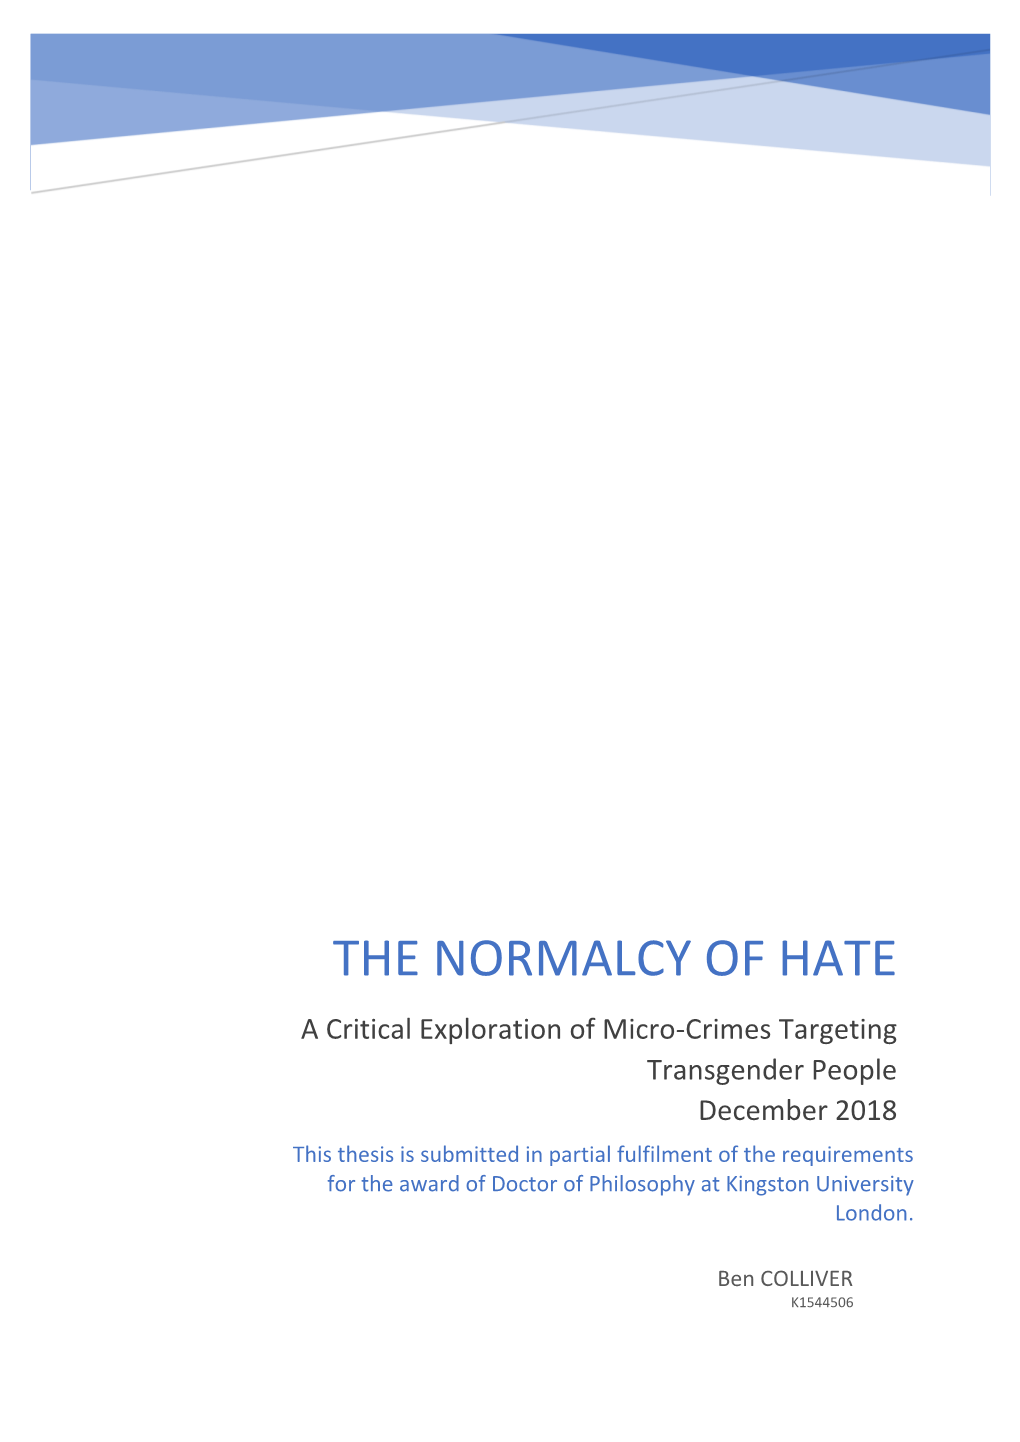 The Normalcy of Hate